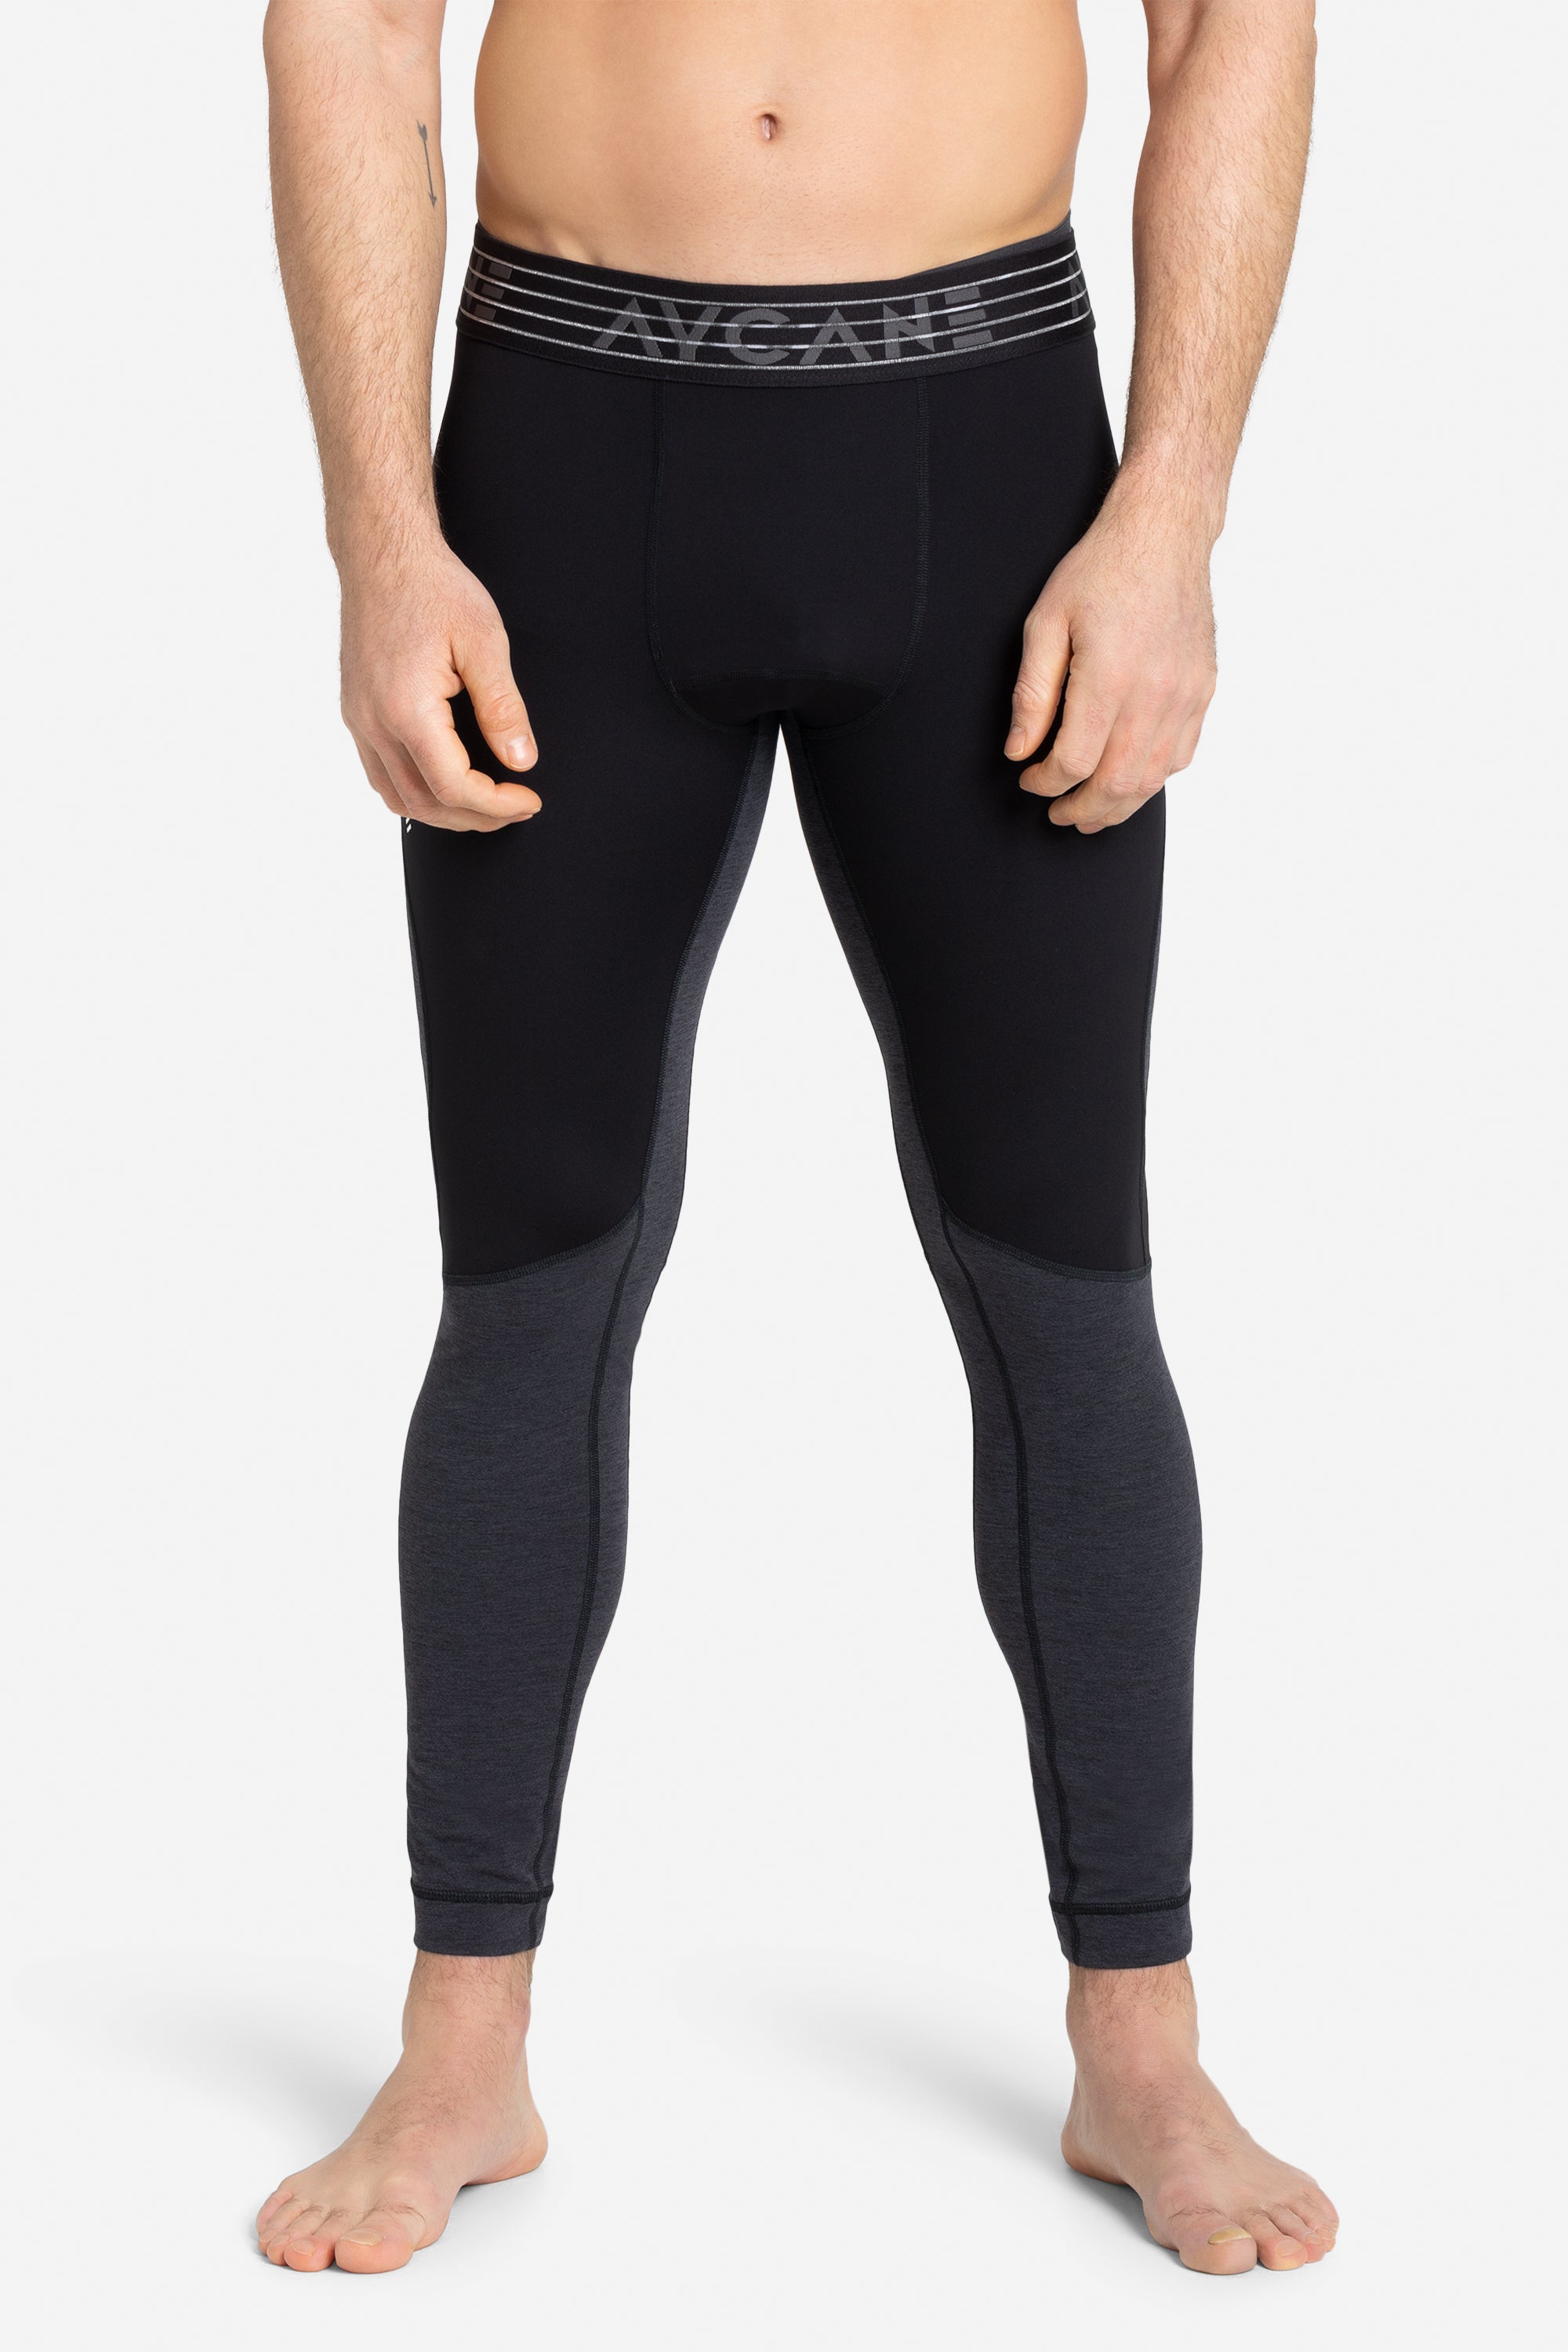 Under Armour UA Hockey Men's Compression Leggings | Source for Sports